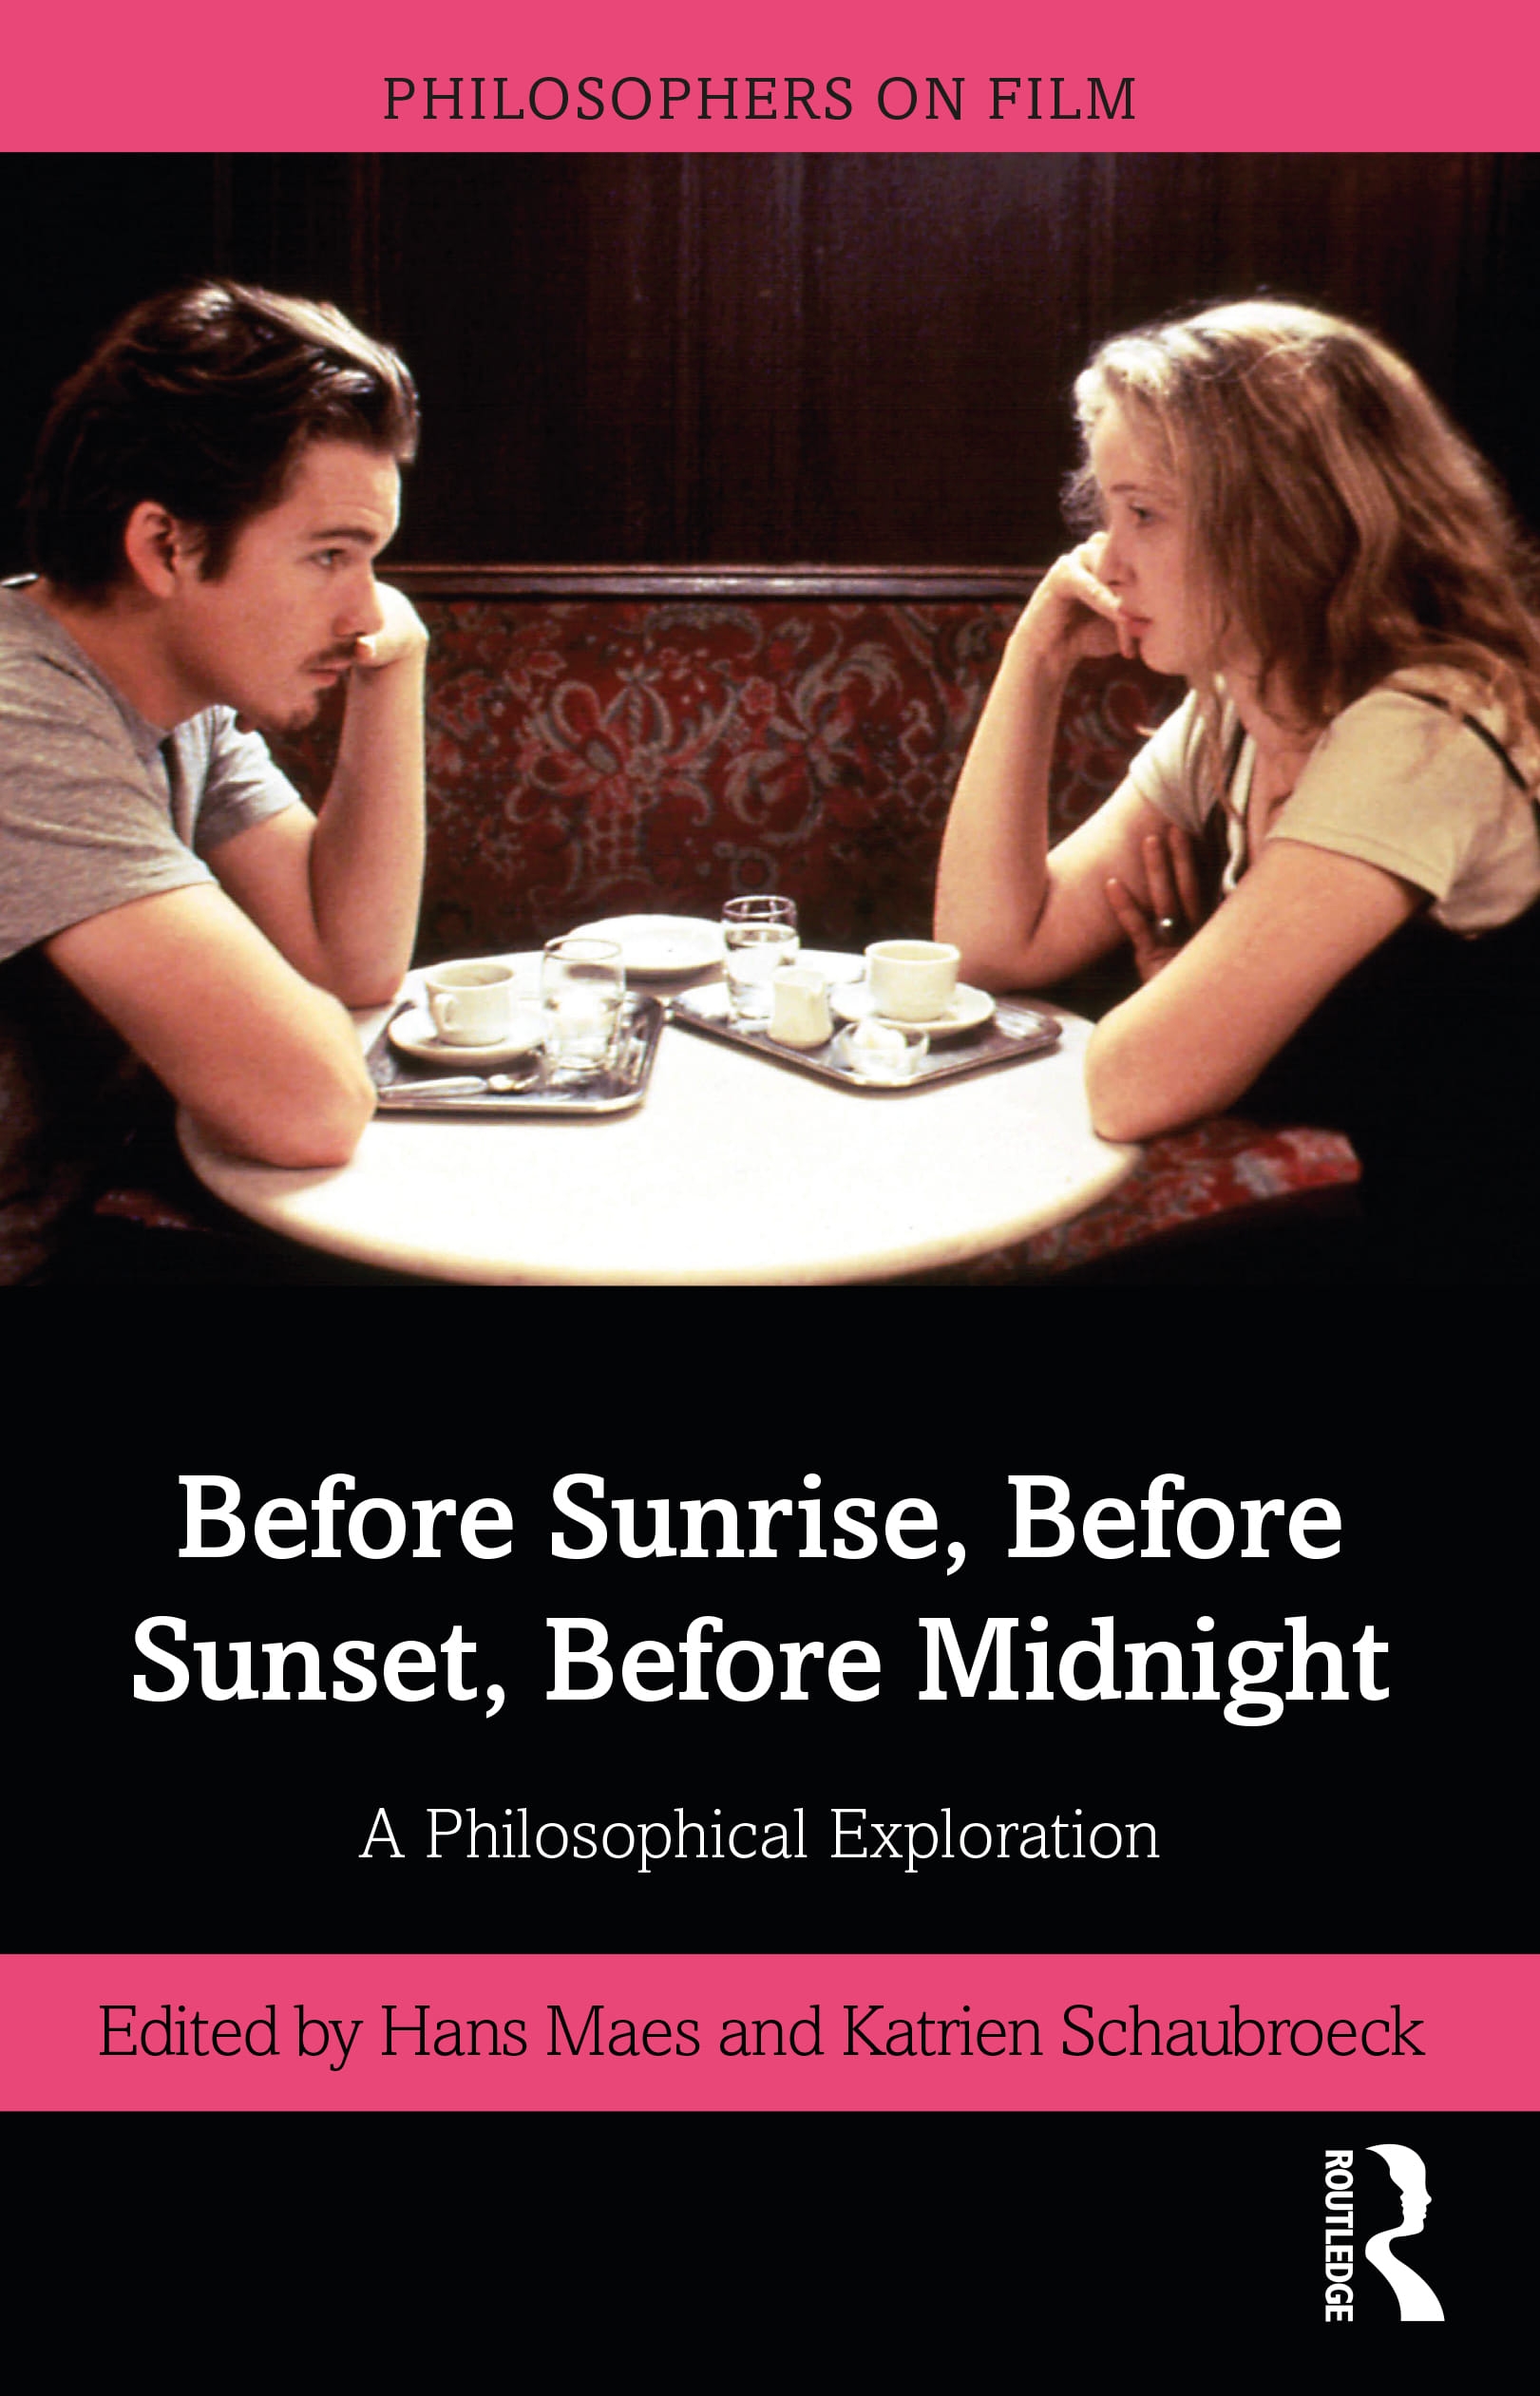 The Philosophy of Richard Linklater’’s Before Trilogy: Before Sunrise, Before Sunset, Before Midnight